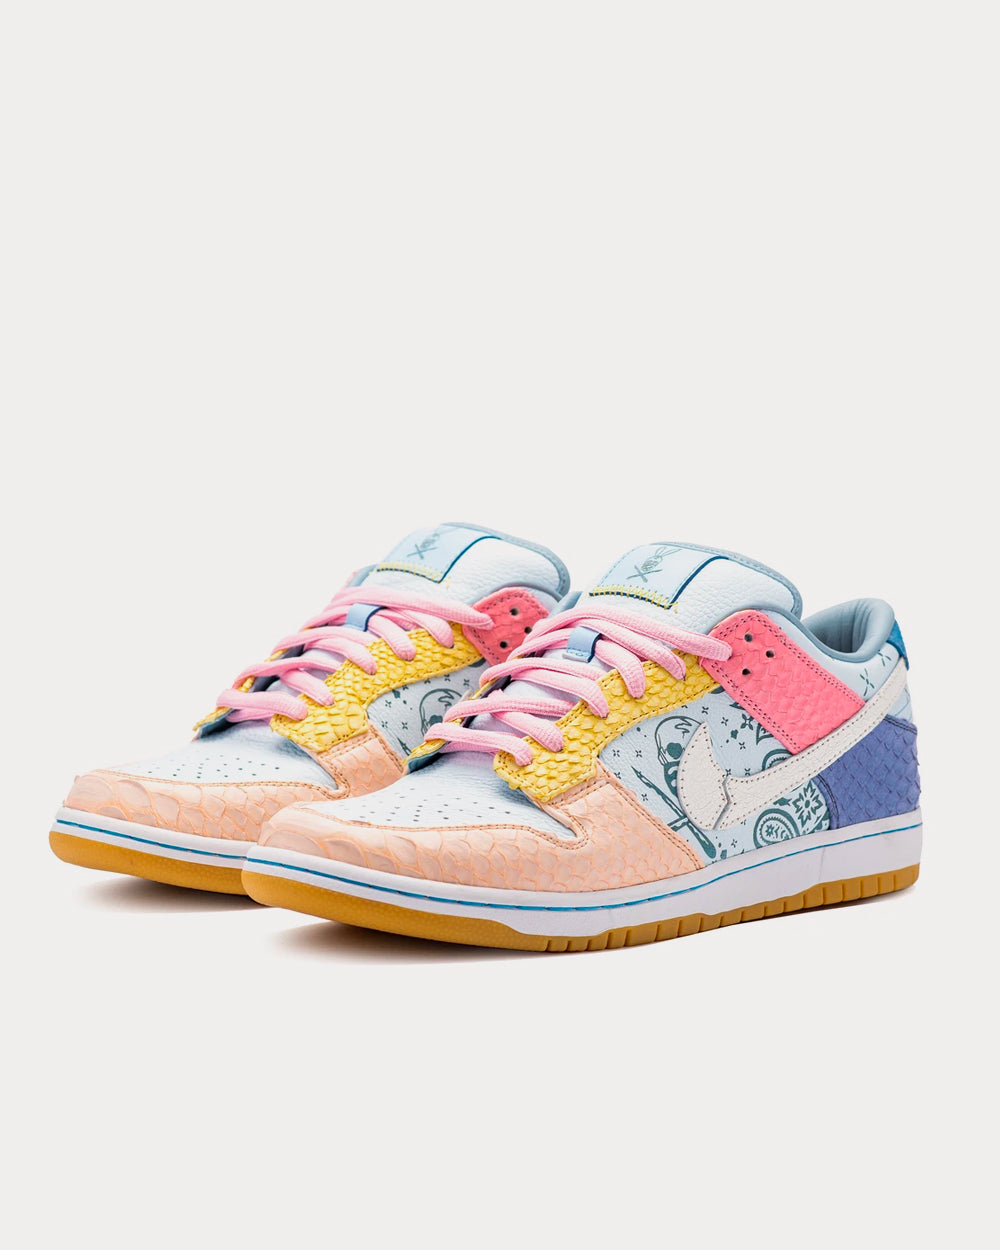 The Shoe Surgeon - Easter Paisley SB Dunk Low Top Sneakers